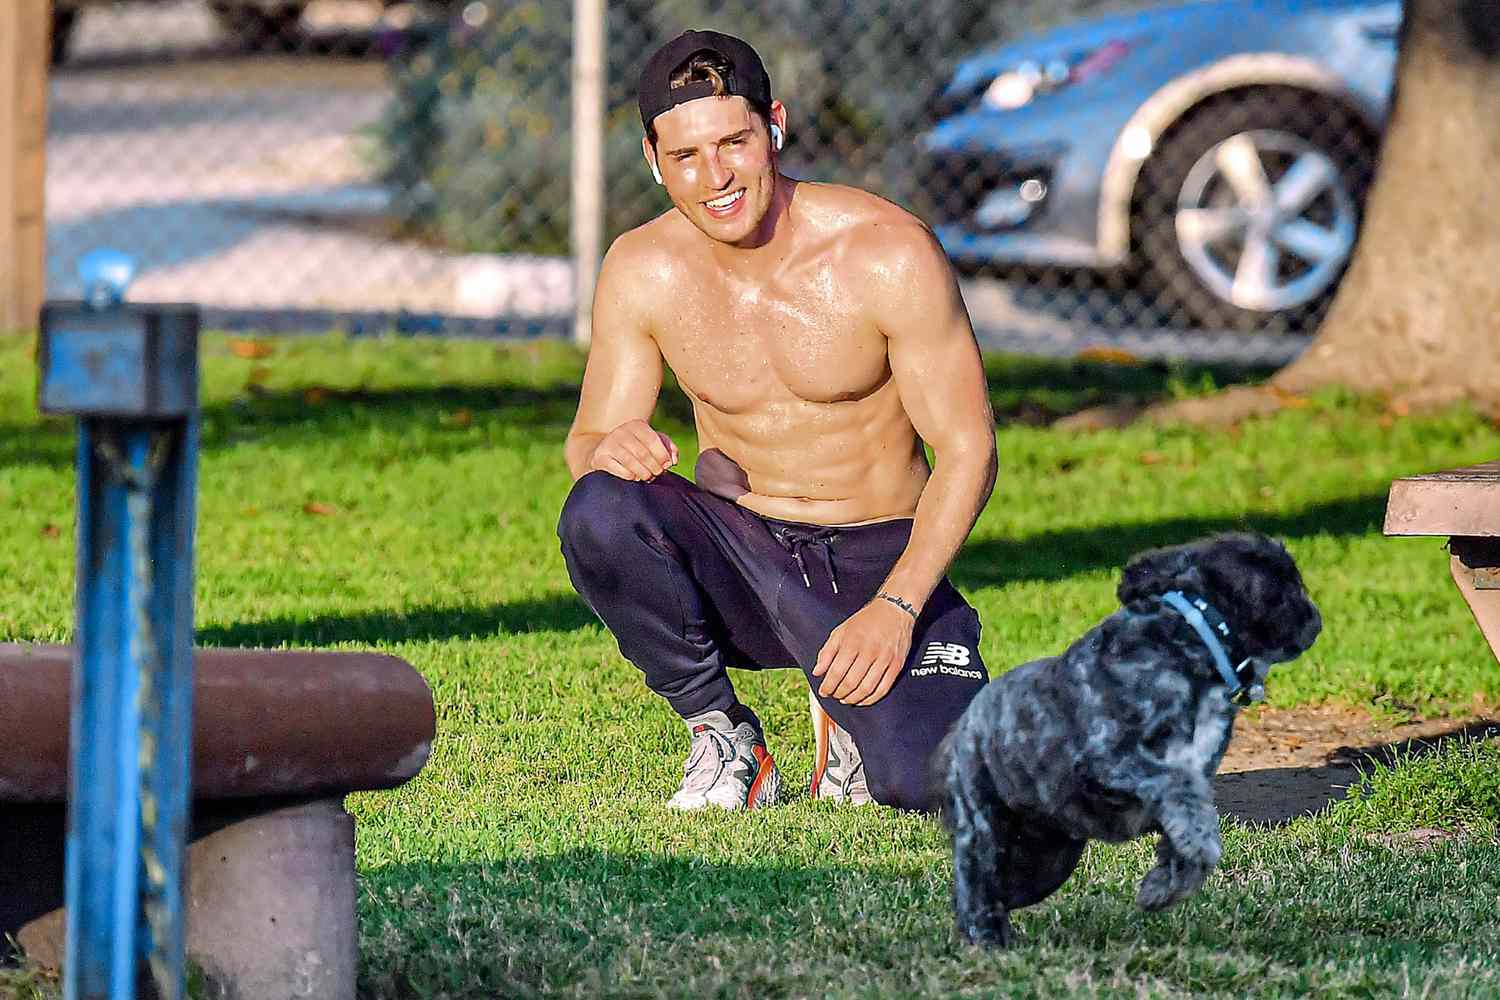 Gregg Sulkin shows shows off his ripped body while working out shirtless in a park in Los Angeles, CA.